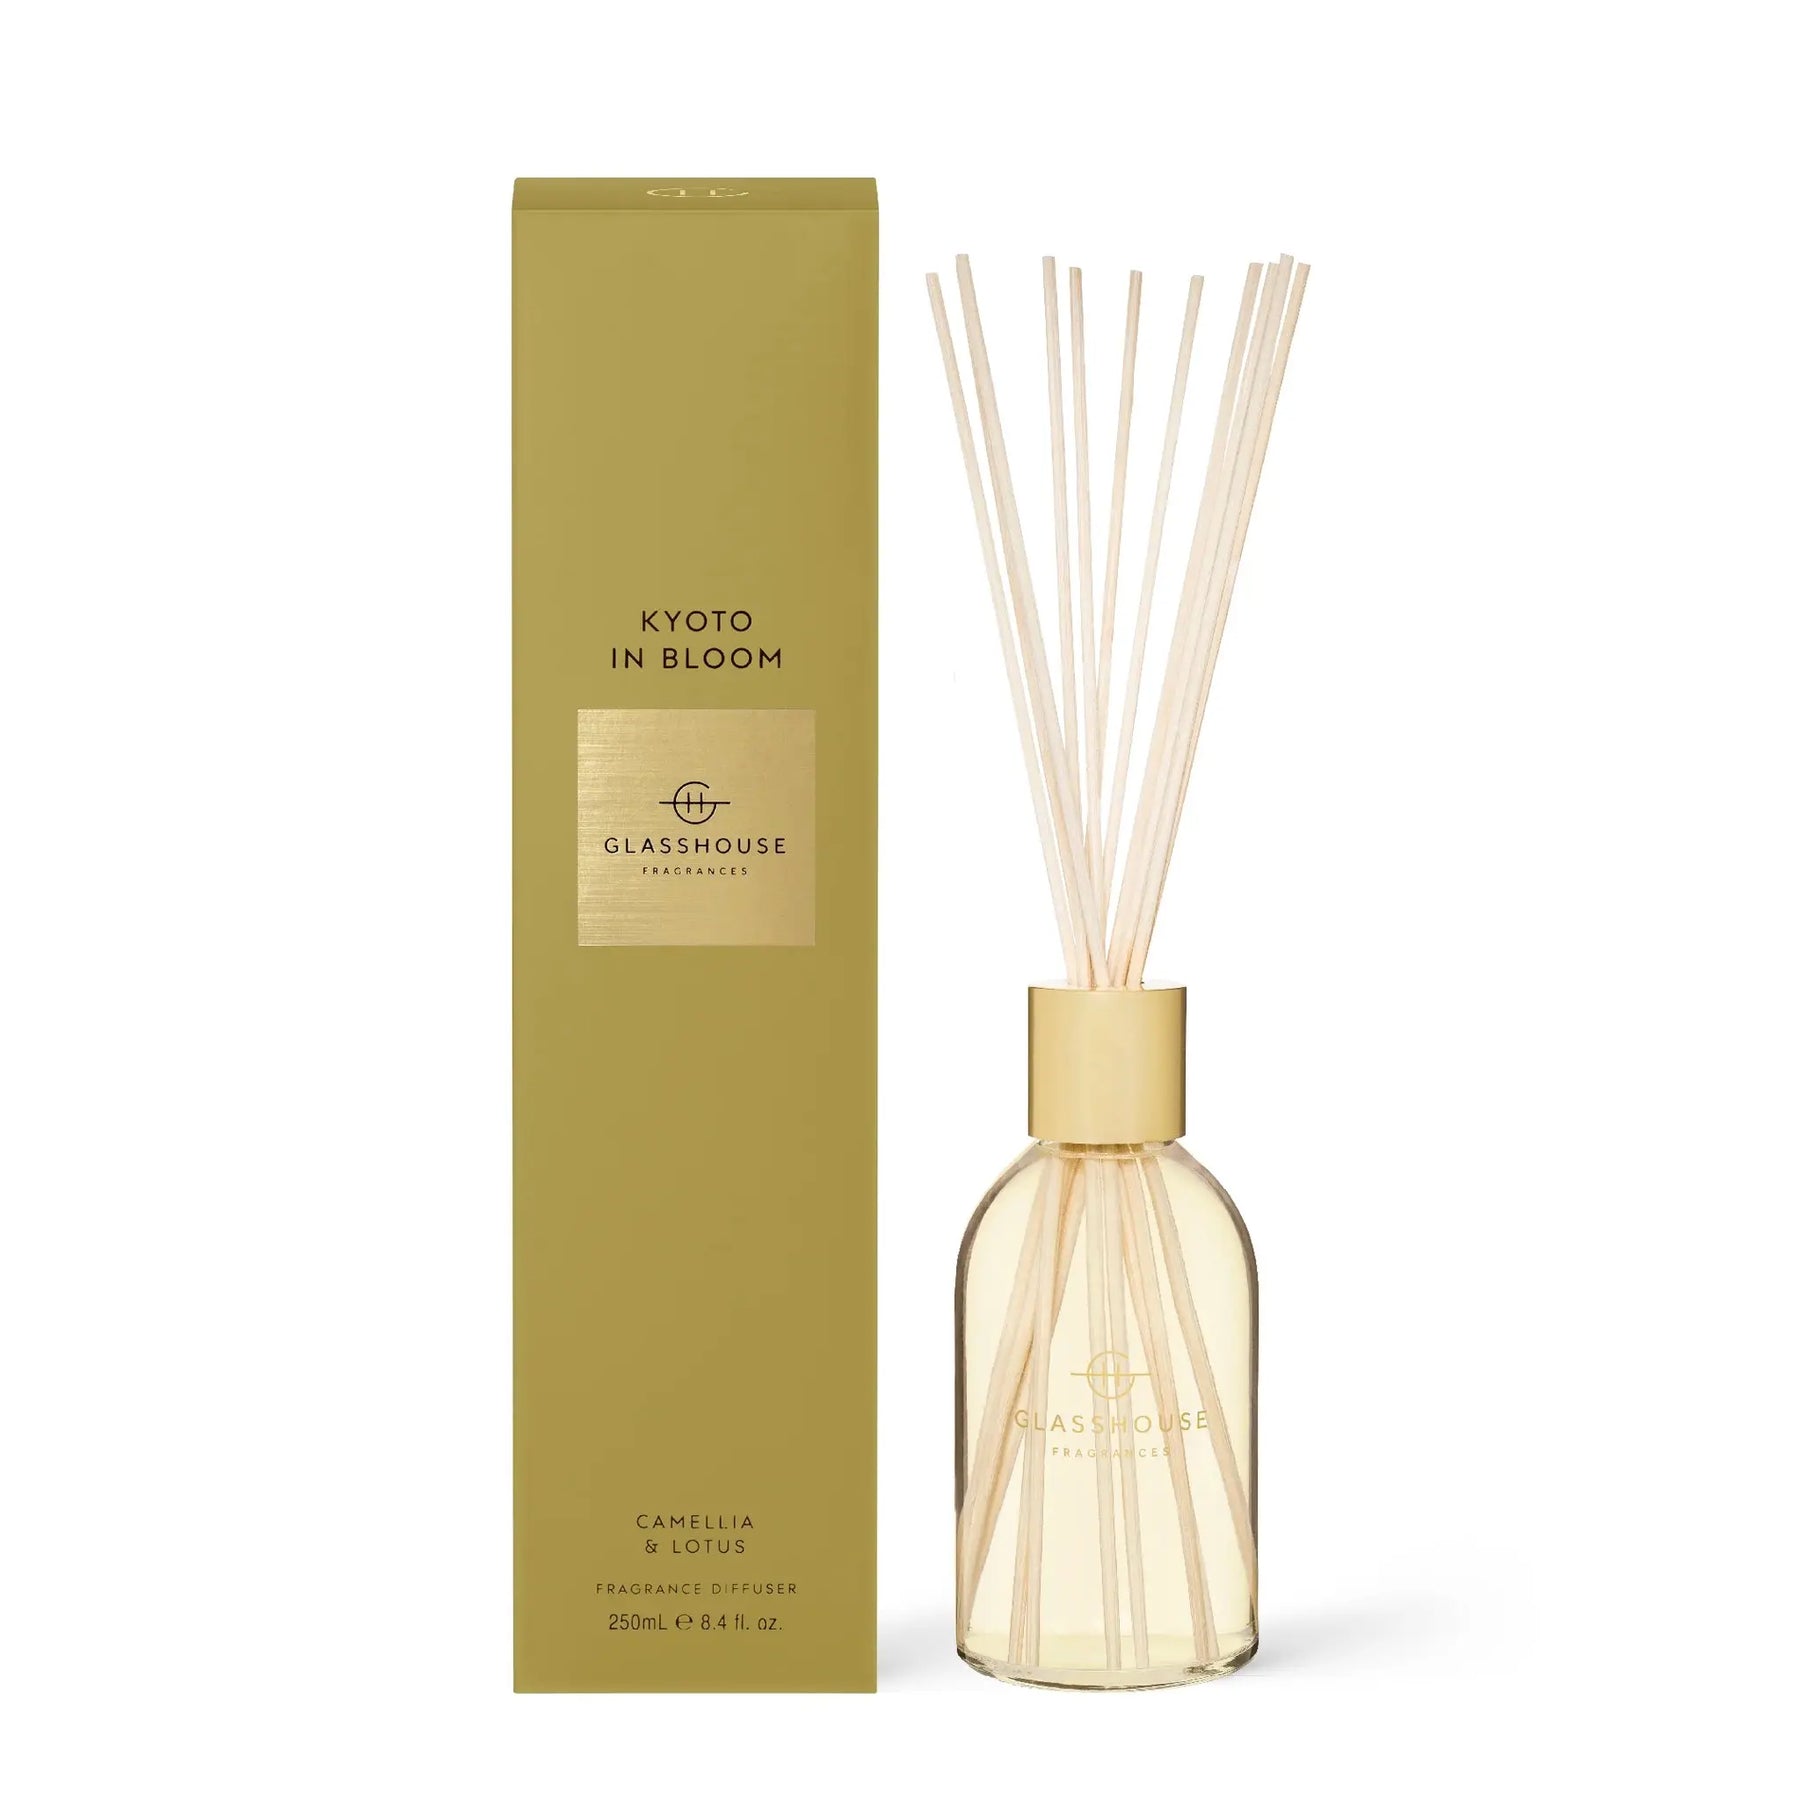 Glasshouse Fragrance Diffuser Kyoto in Bloom Camellia and Lotus 250 mL 8.4 fluid ounce